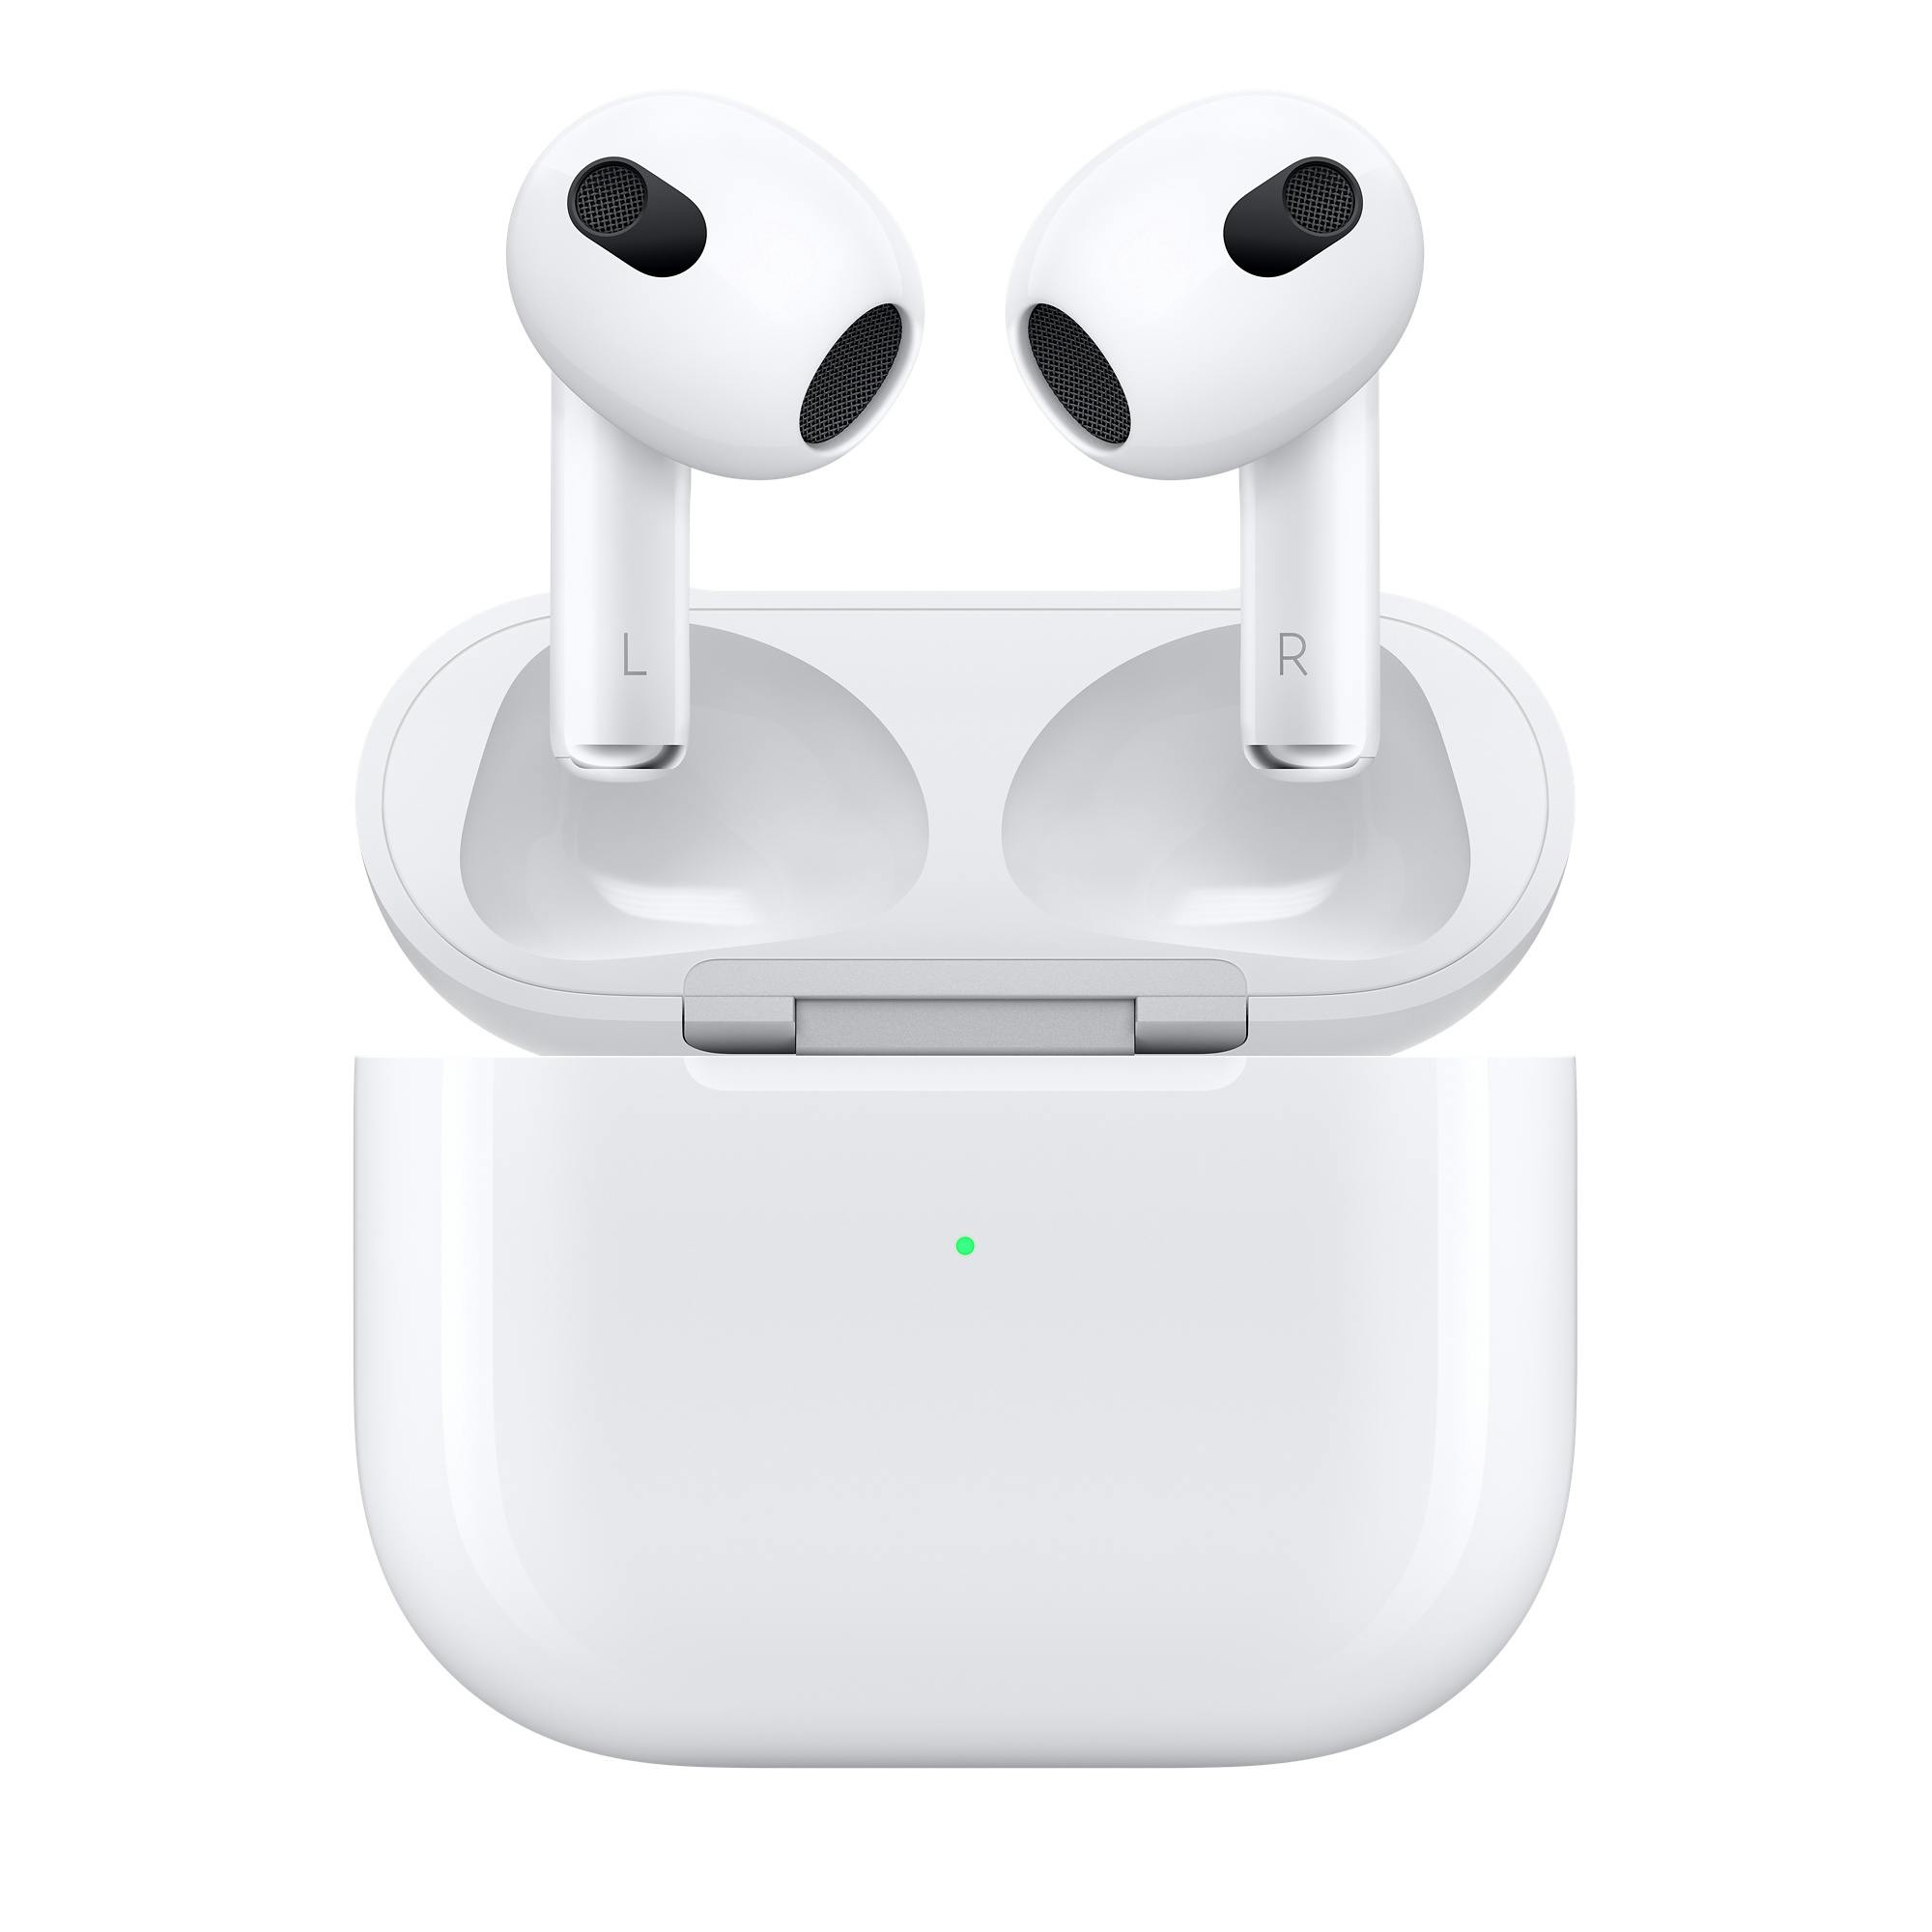 Best Apple AirPods Black Deals 2022 - As Low as $79! - The Coupon Lady